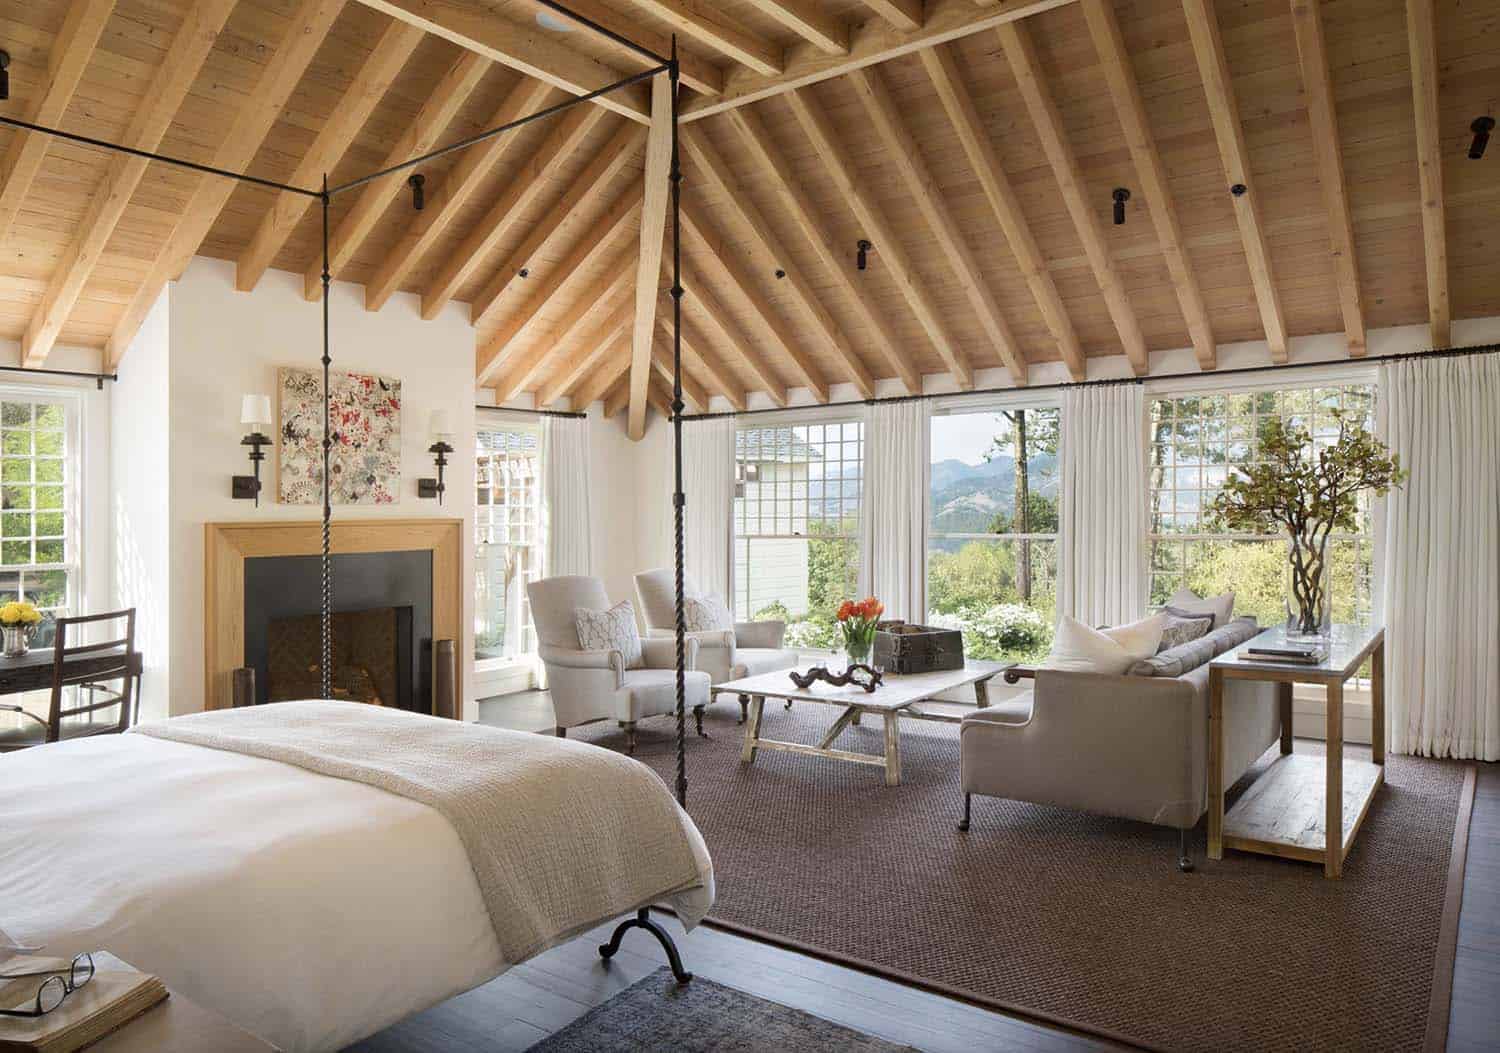 Romantic country-house style bedroom with wooden ceiling and fireplace